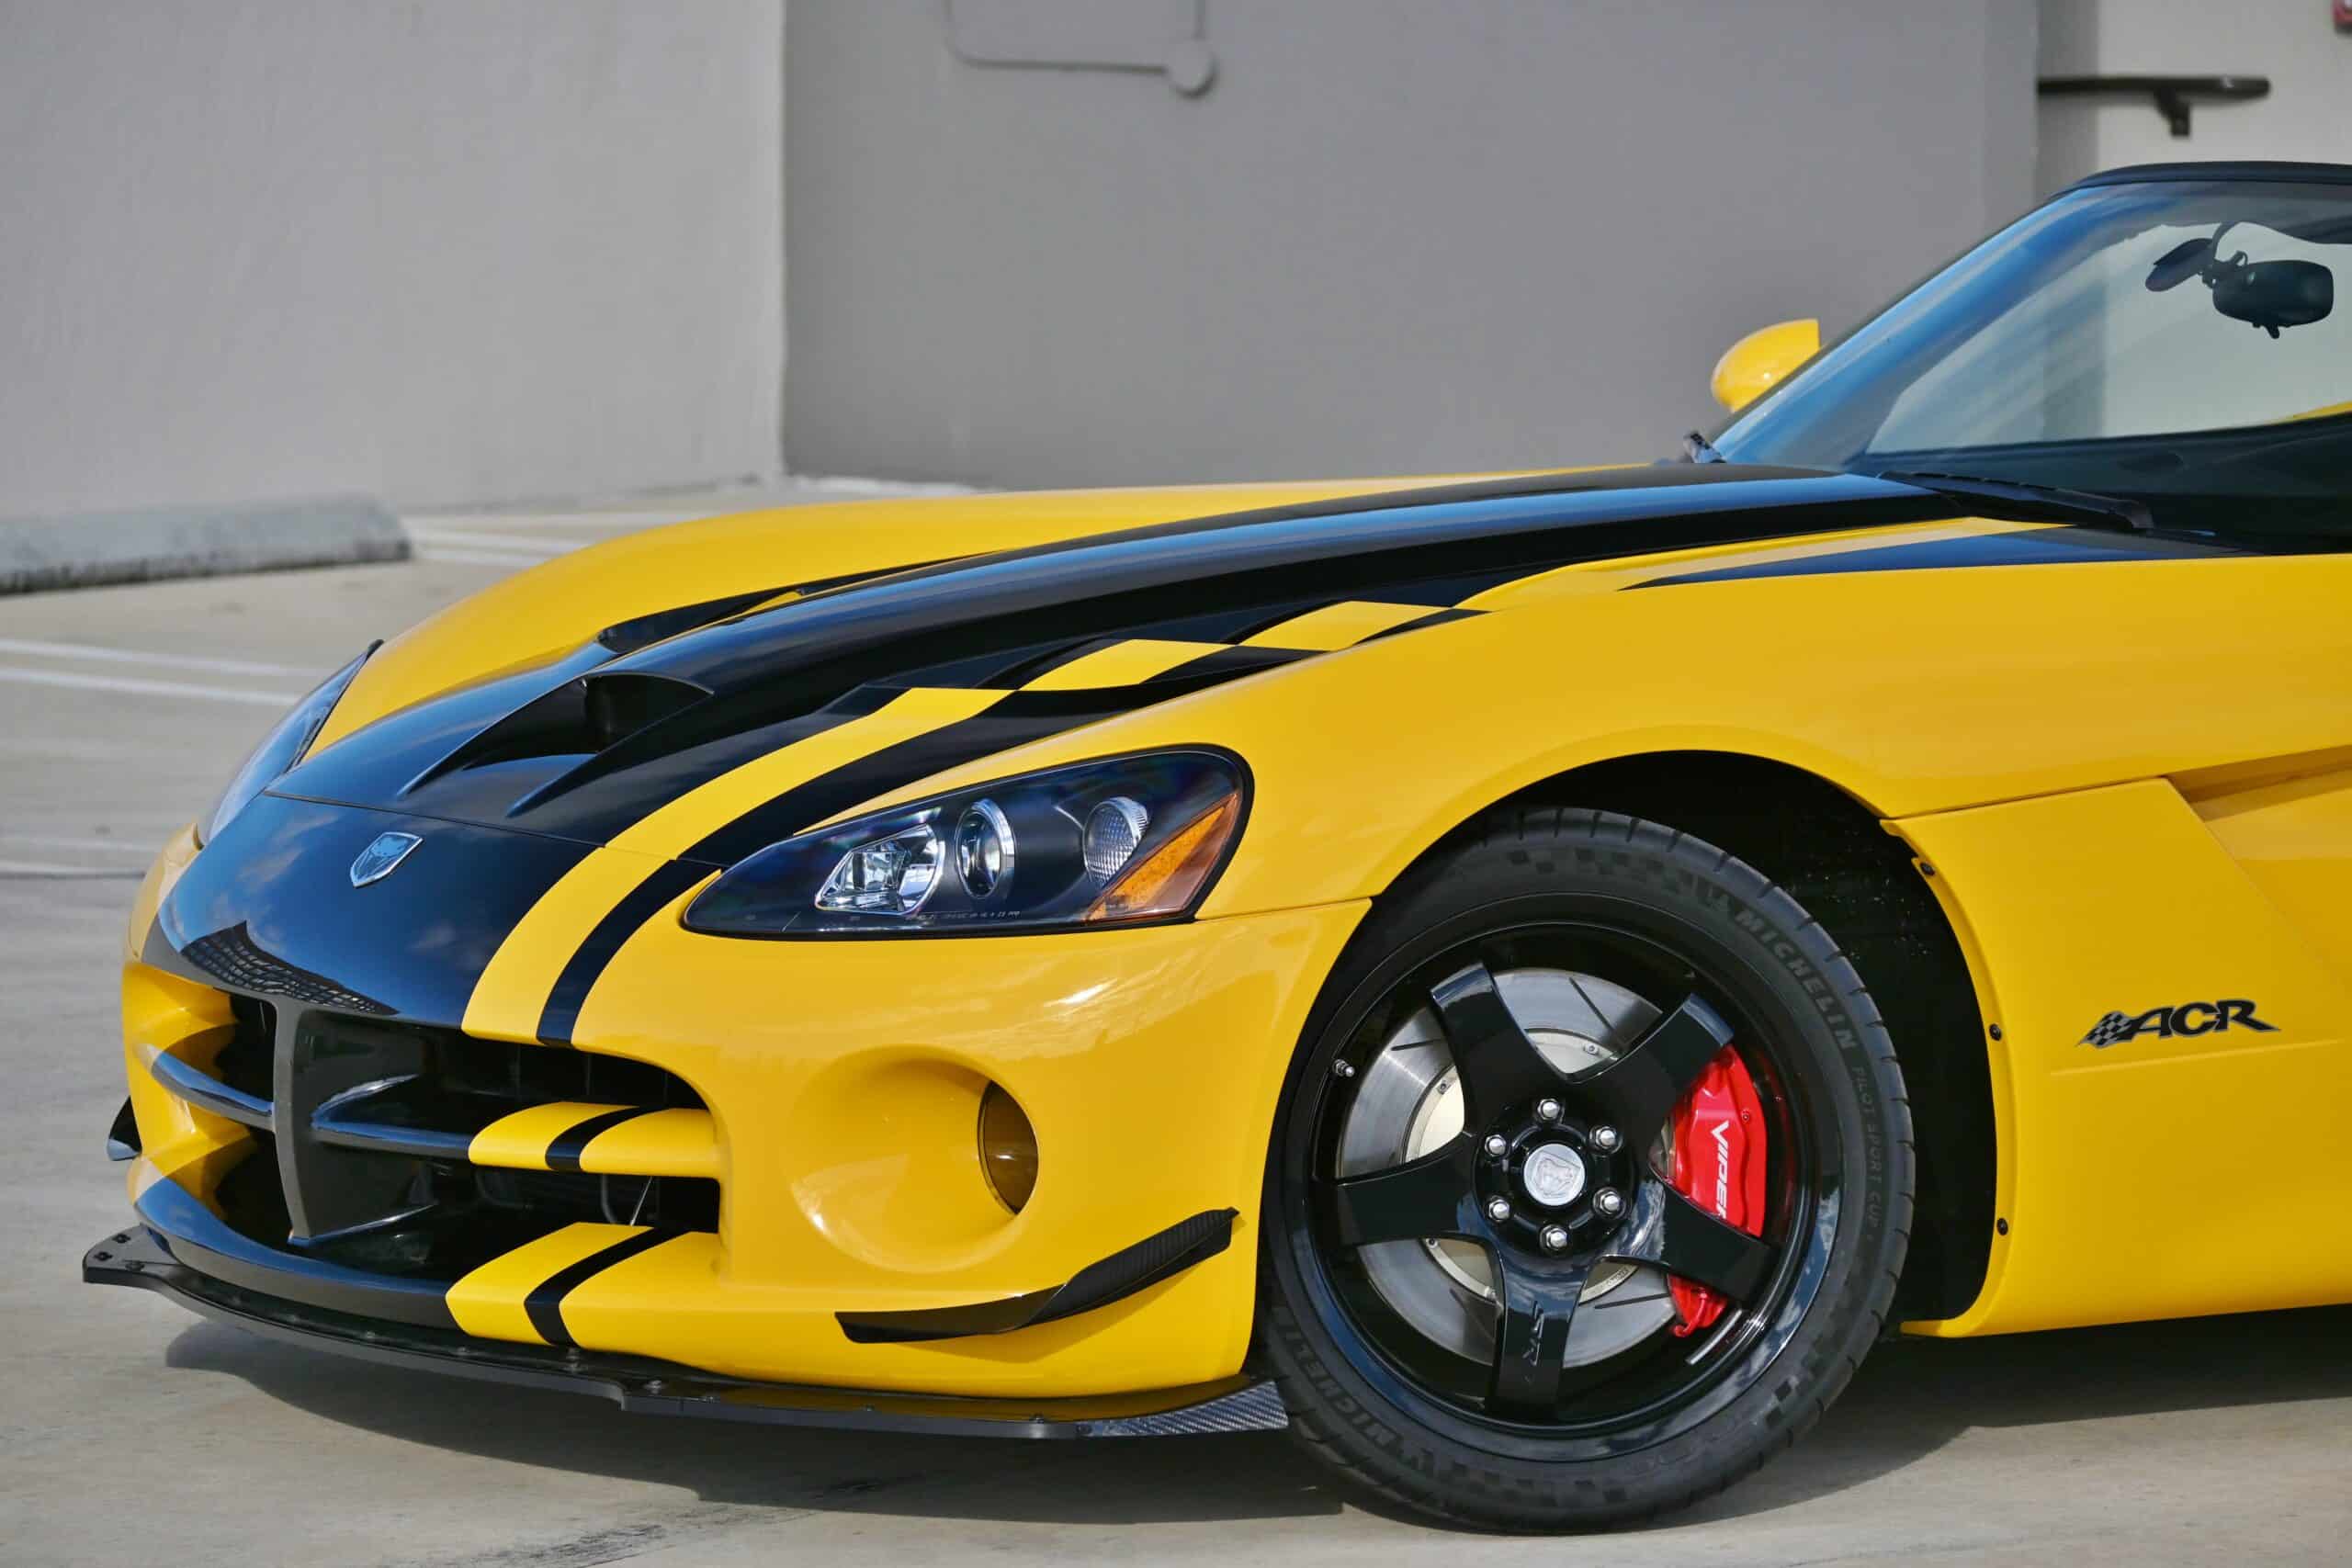 2010 Dodge Viper ACR SRT 10 Roadster 1 of 3 Yellow ACR Convertibles- Original Window Sticker- only 2k Miles -LIKE NEW